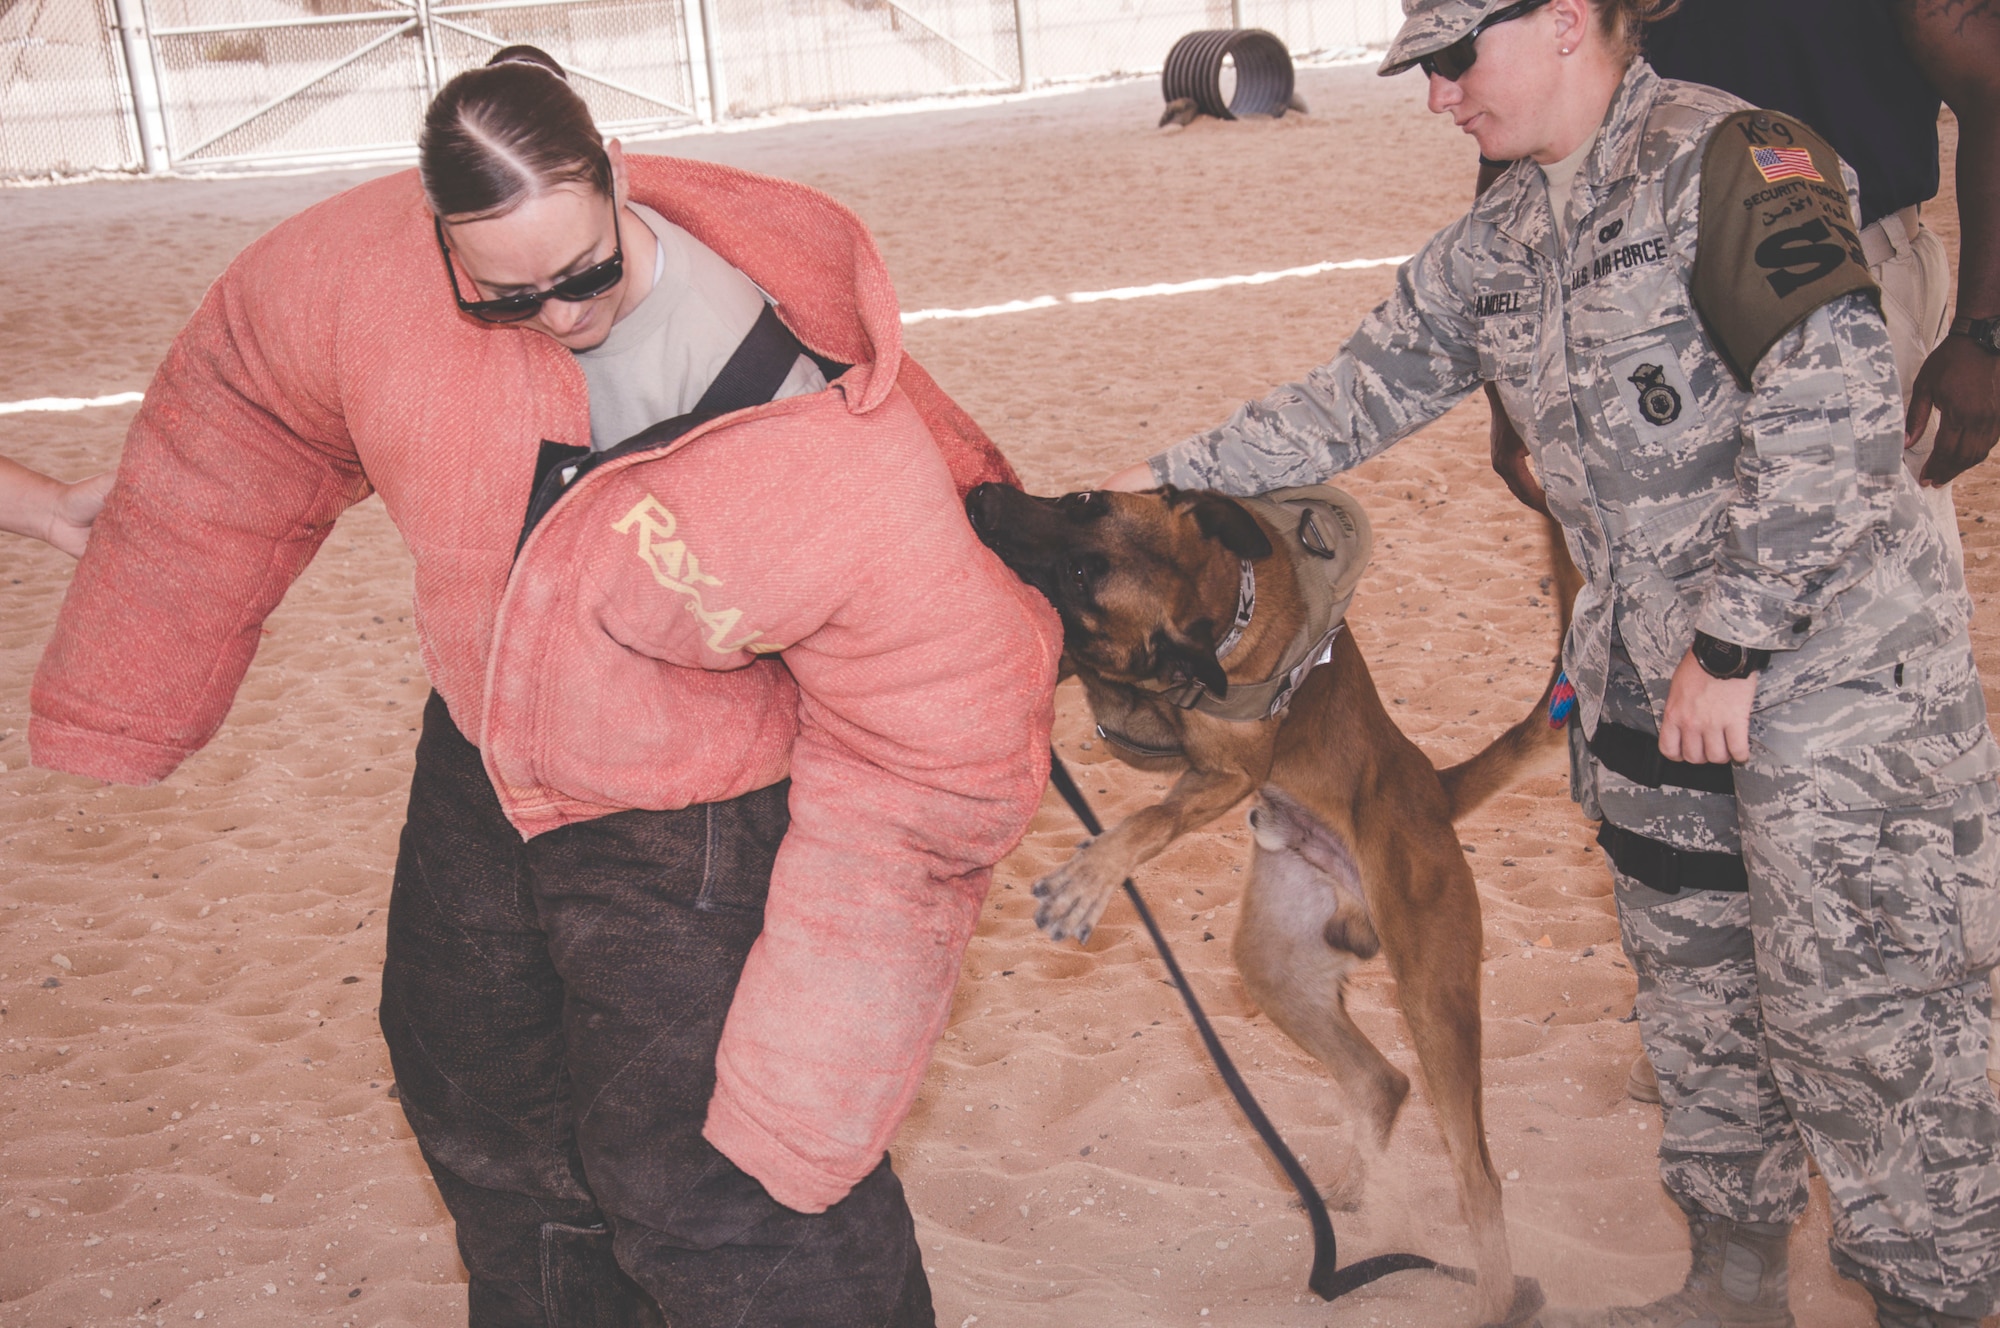 Staff Sgt. Jessica Moore (left) tries to flee from military working dog Lloren, as handler Staff Sgt. Sara Yandell regains control of MWD Lloren during a patrol phase of training. (U.S. Air Force Photo/Master Sgt. Eric M. Sharman)